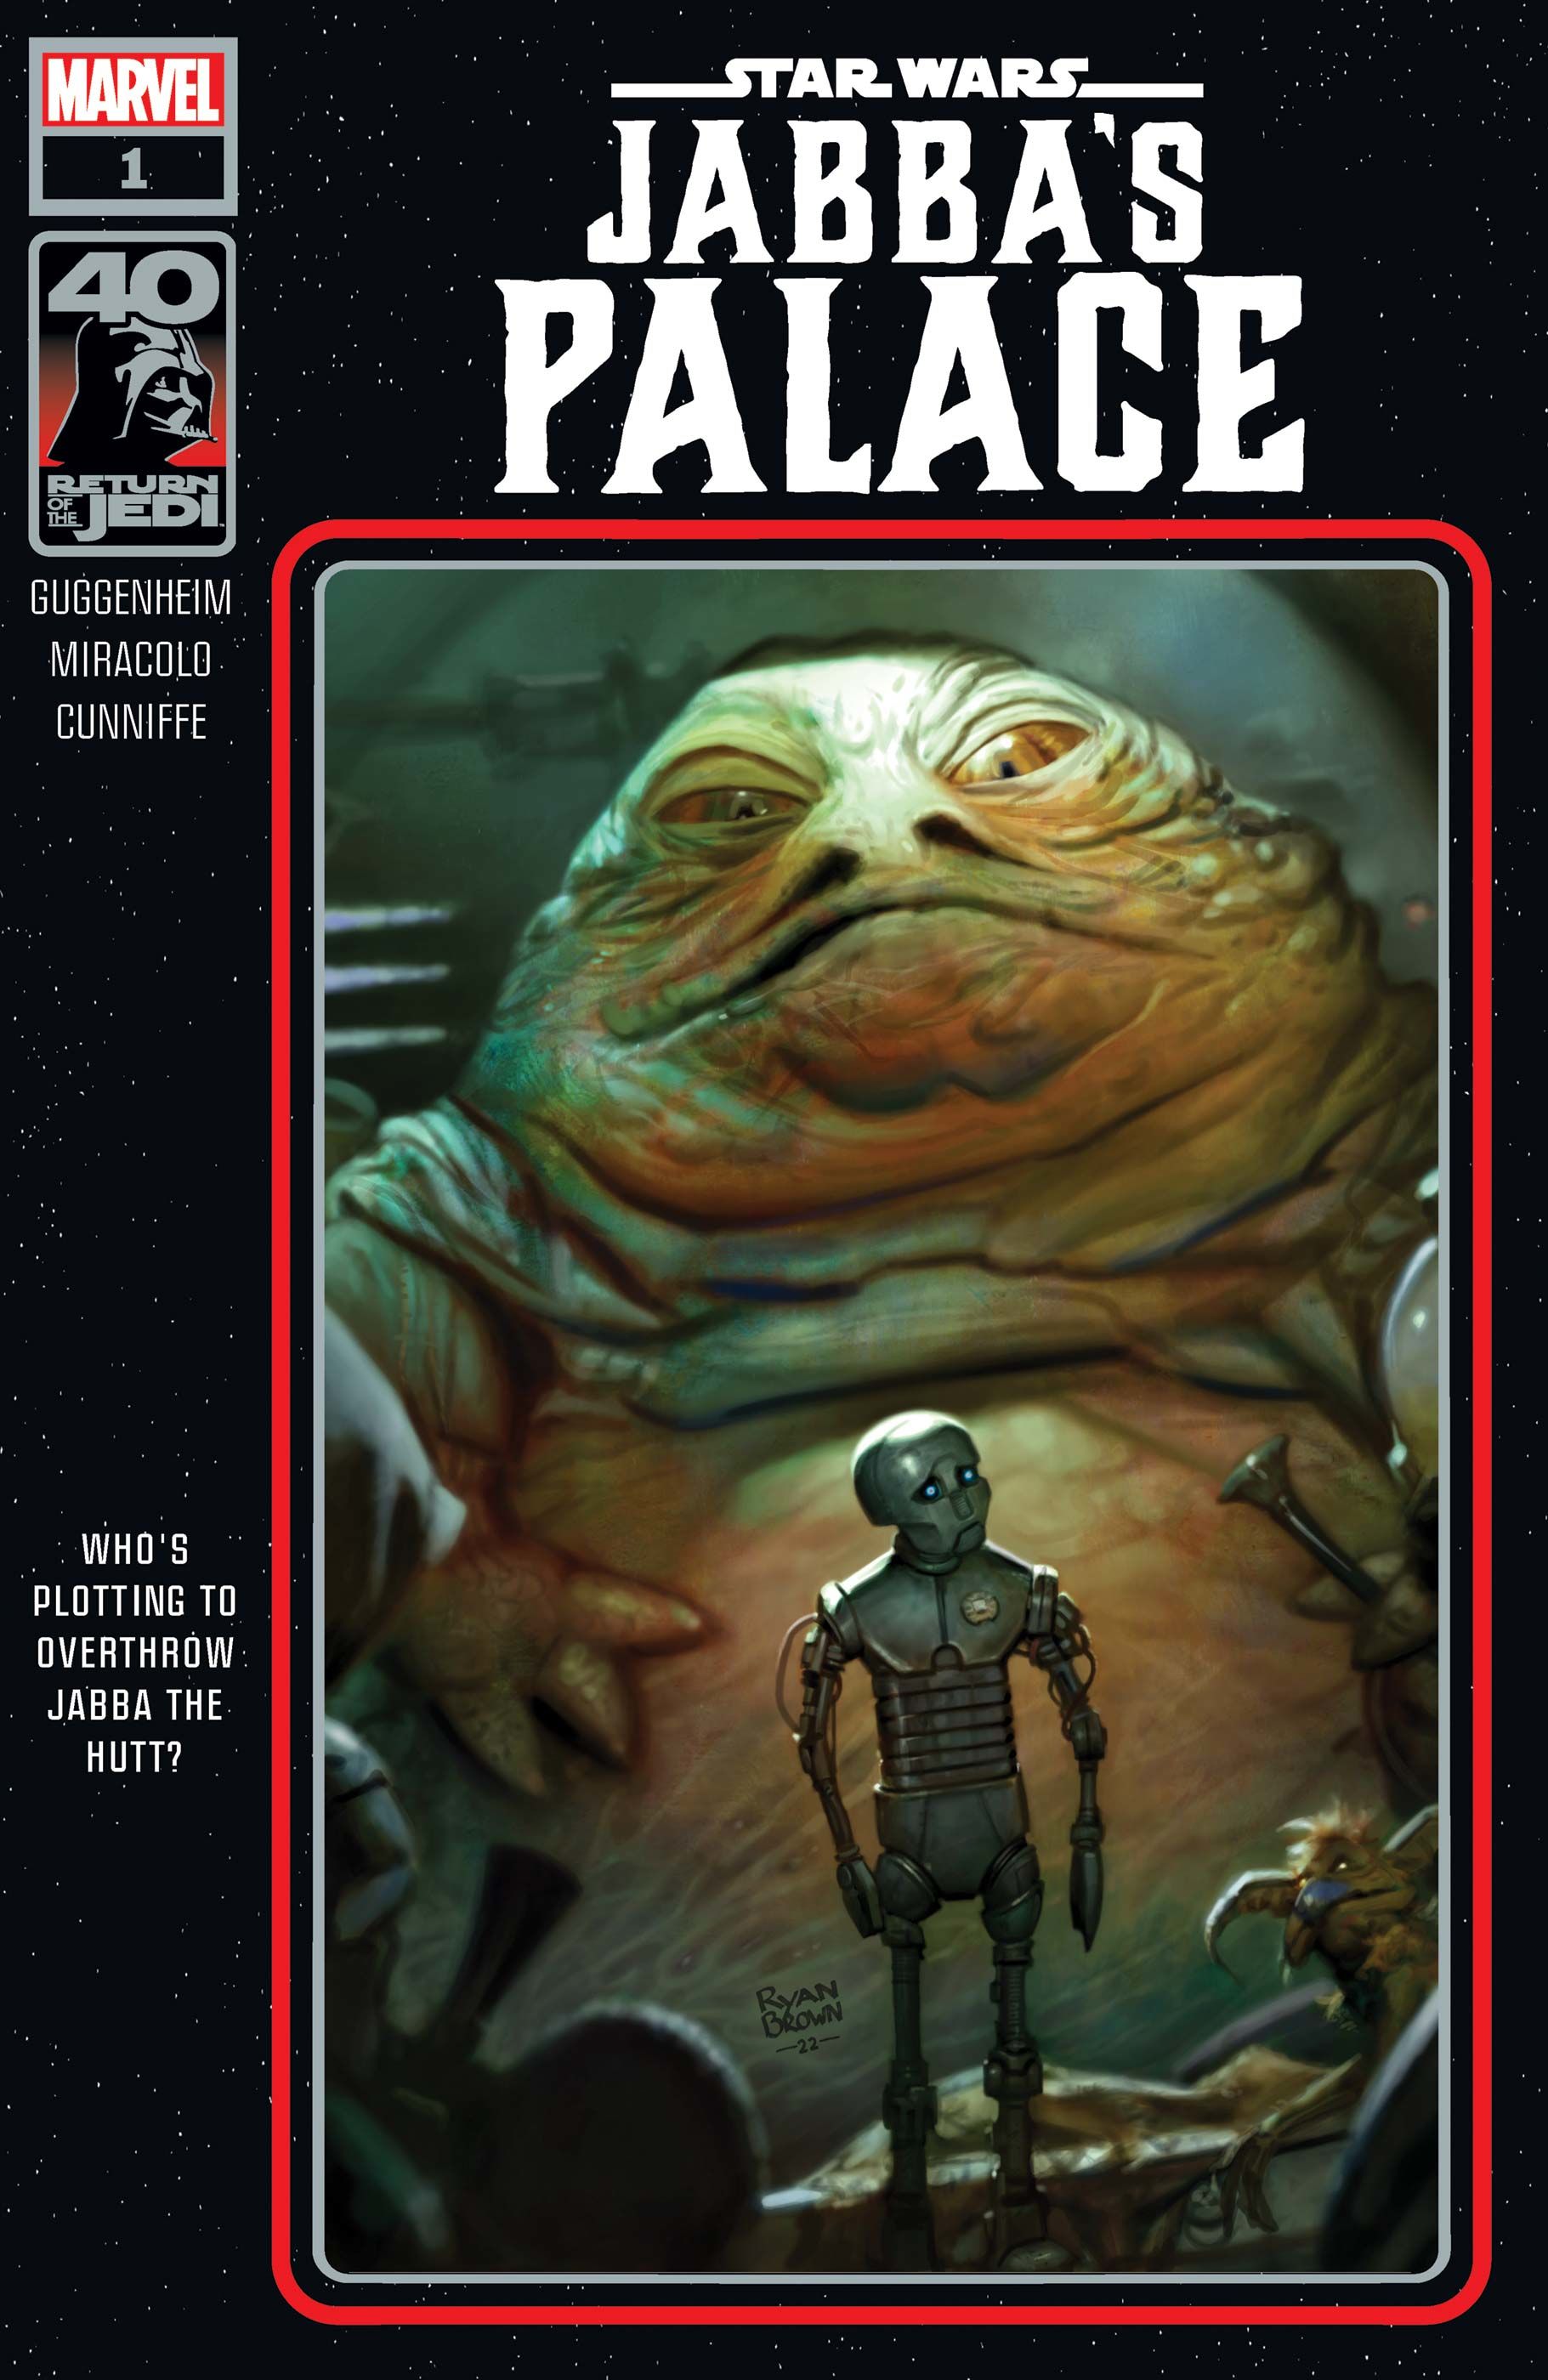 Jabba the Hutt looms over Eightyem the droid on the cover of Marvel Comics' Star Wars: Return of the Jedi - Jabba's Palace #1 by Ryan Brown.